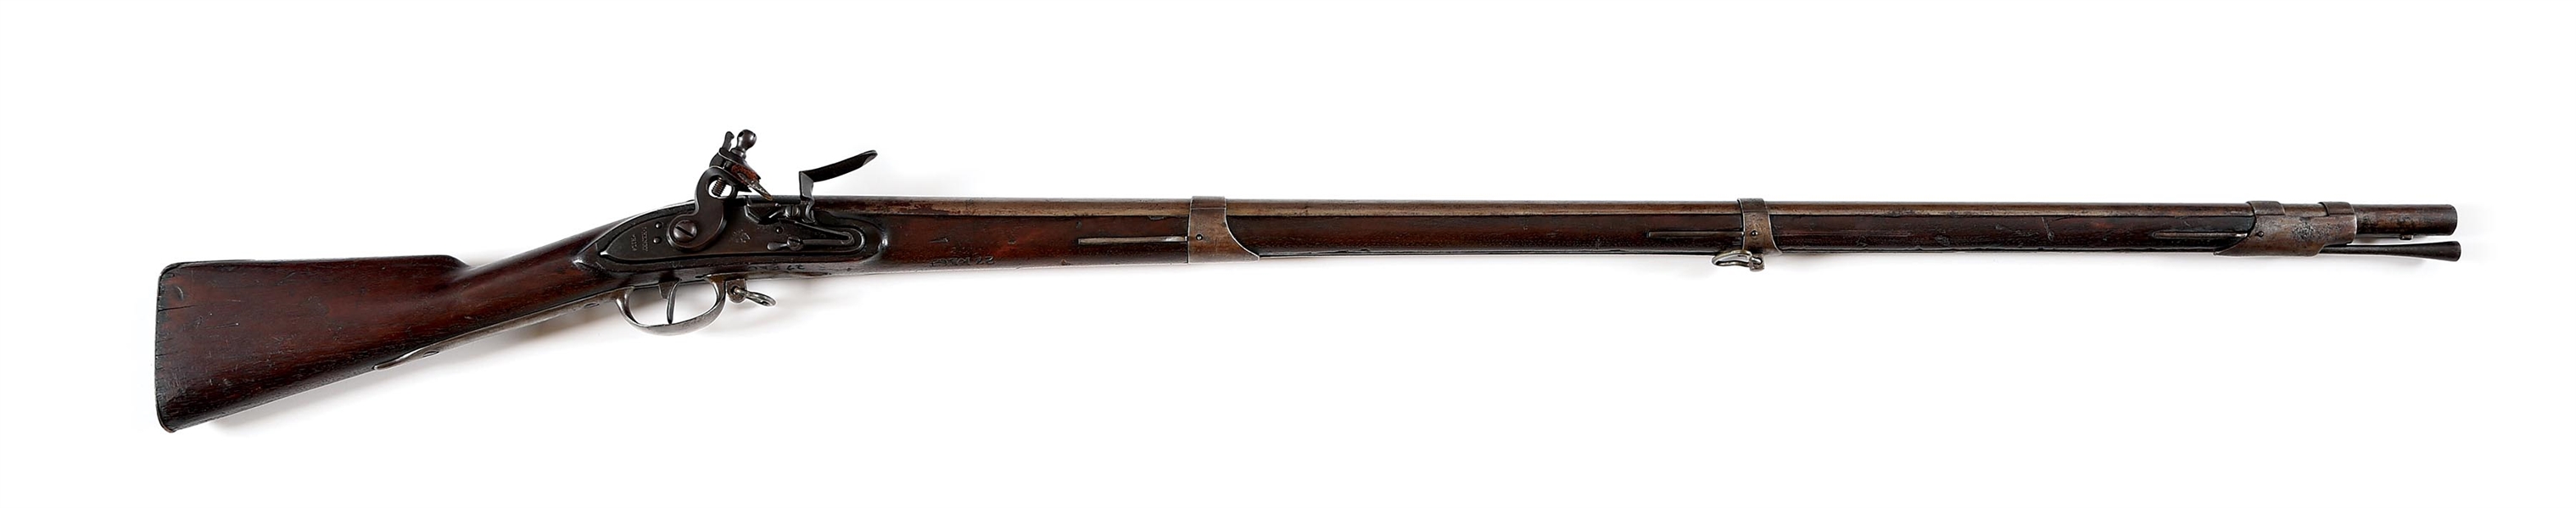 (A) 27TH MARYLAND REGIMENT BRANDED US MODEL 1808/12 CONTRACT MUSKET BY J HENRY.